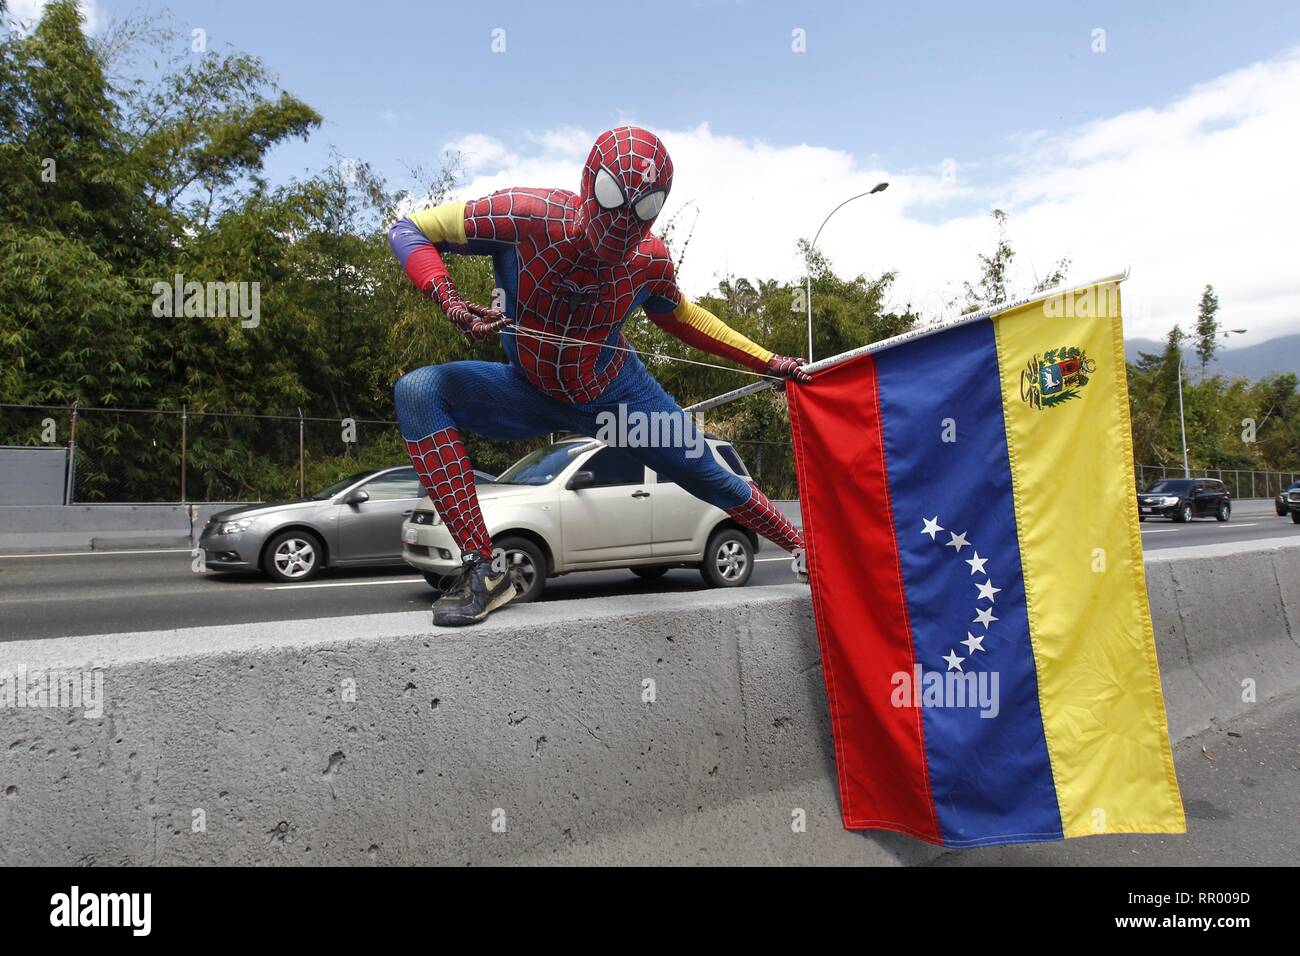 caracas-venezuela-23rd-feb-2019-a-man-in-a-spiderman-costume-participates-in-a-demonstration-in-favor-of-the-entry-of-humanitarian-aid-to-venezuela-in-caracas-venezuela-23-february-2019-credit-ral-martnezefealamy-live-news-RR009D.jpg